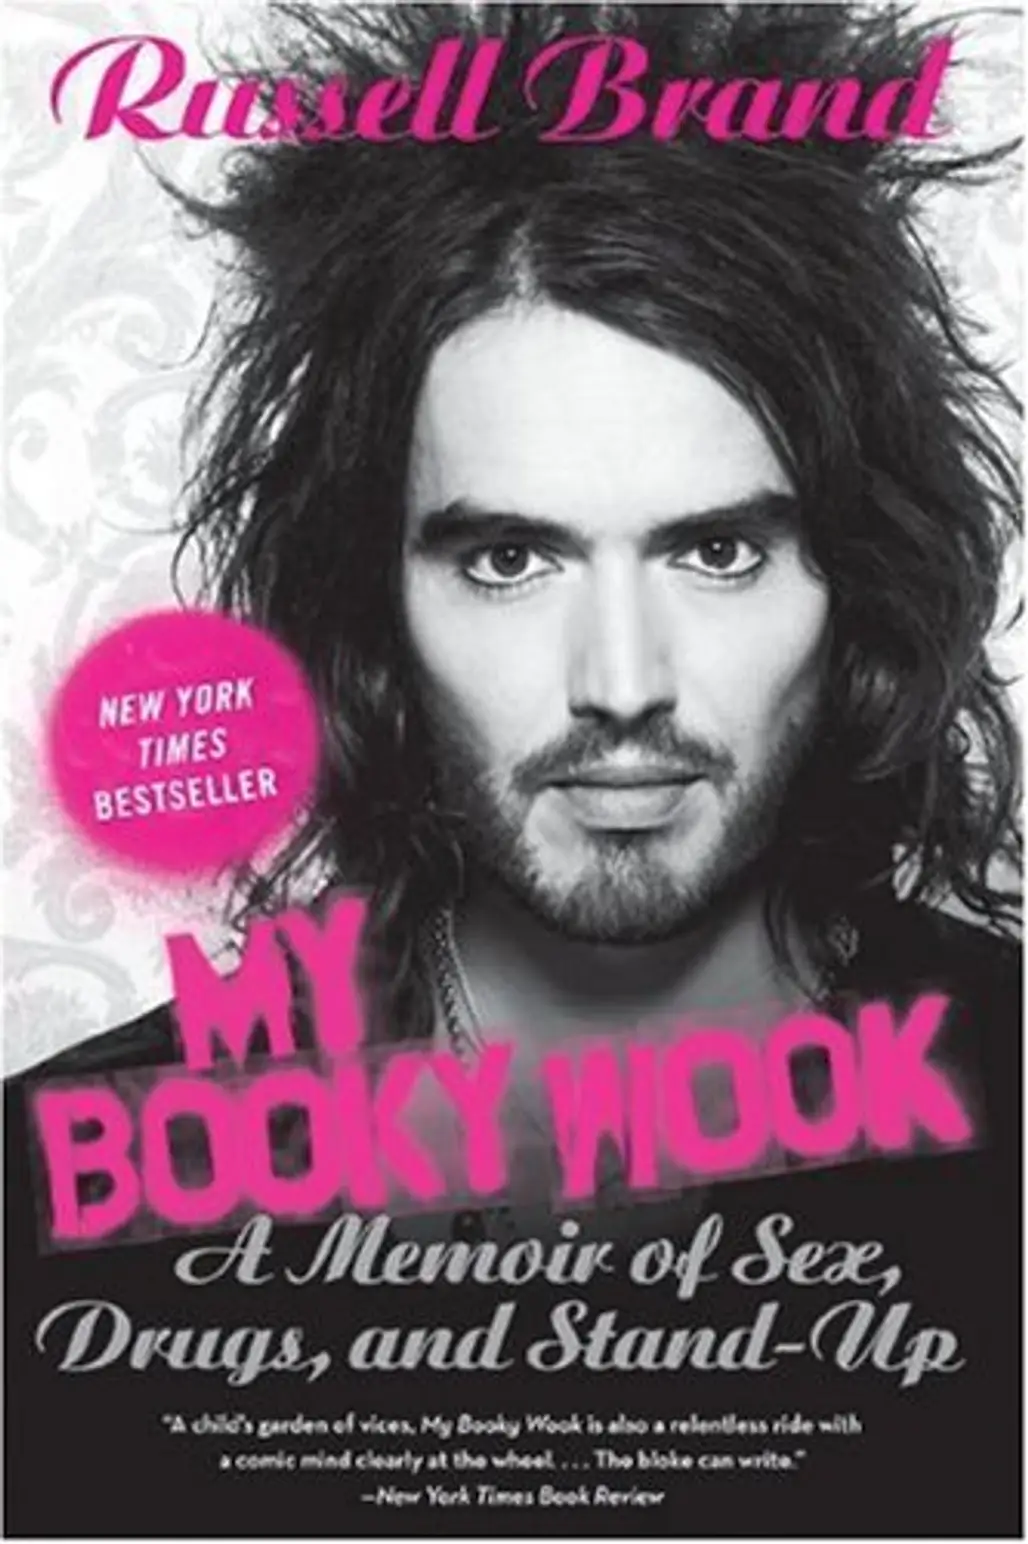 “My Booky Wook” by Russell Brand